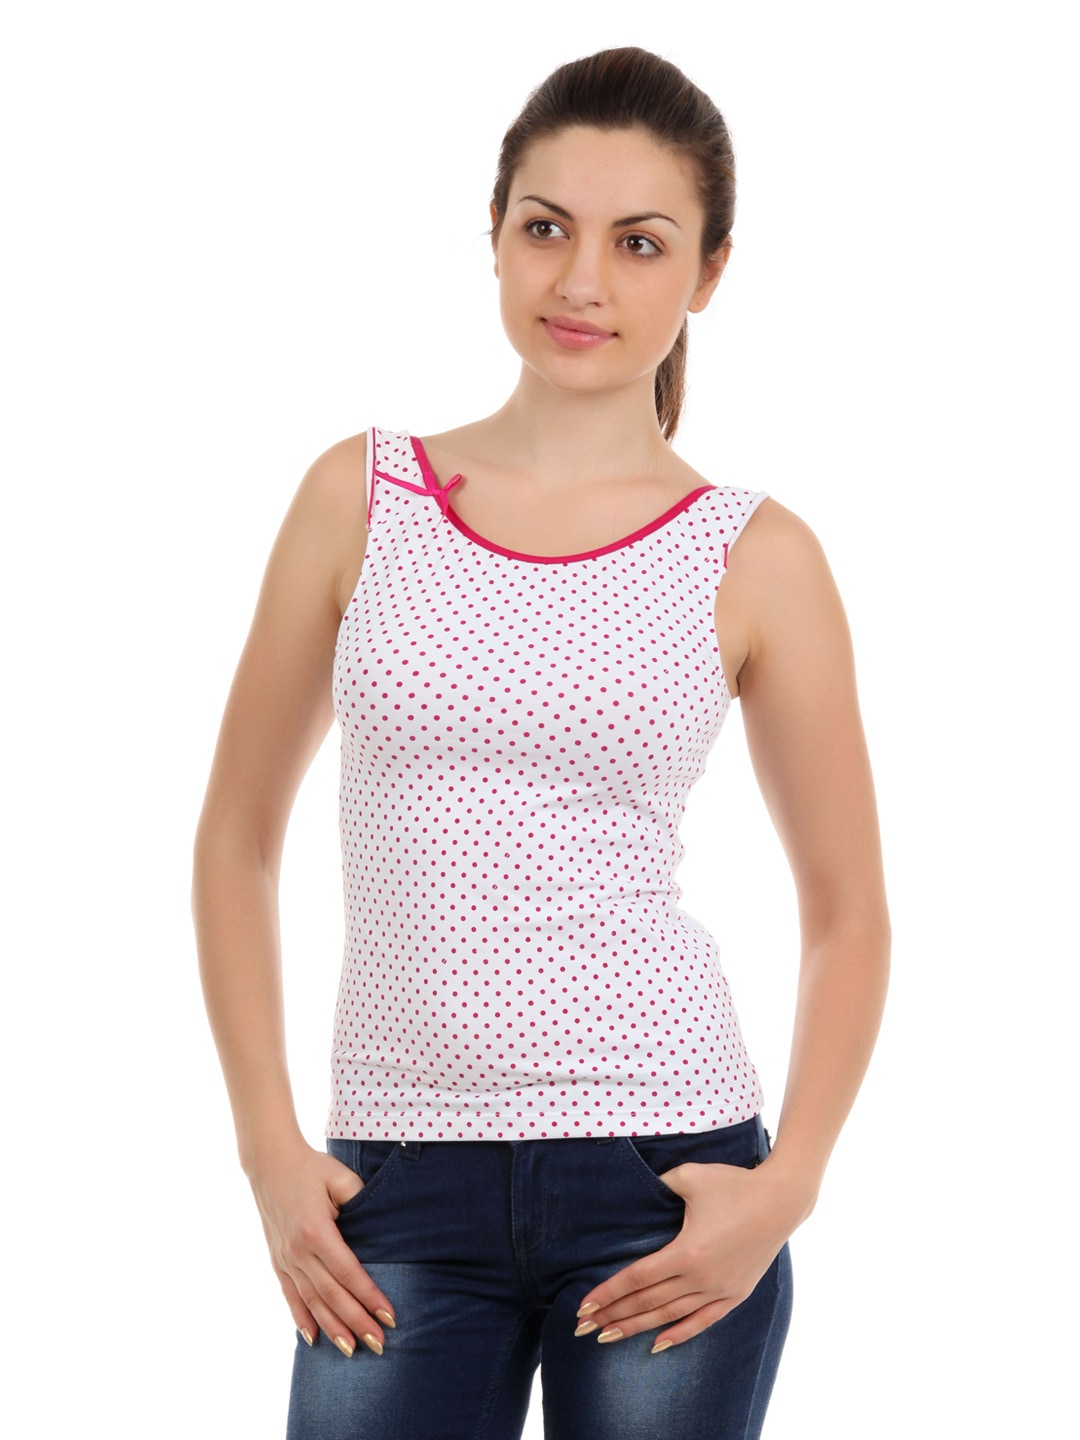 Bwitch White Printed Camisole